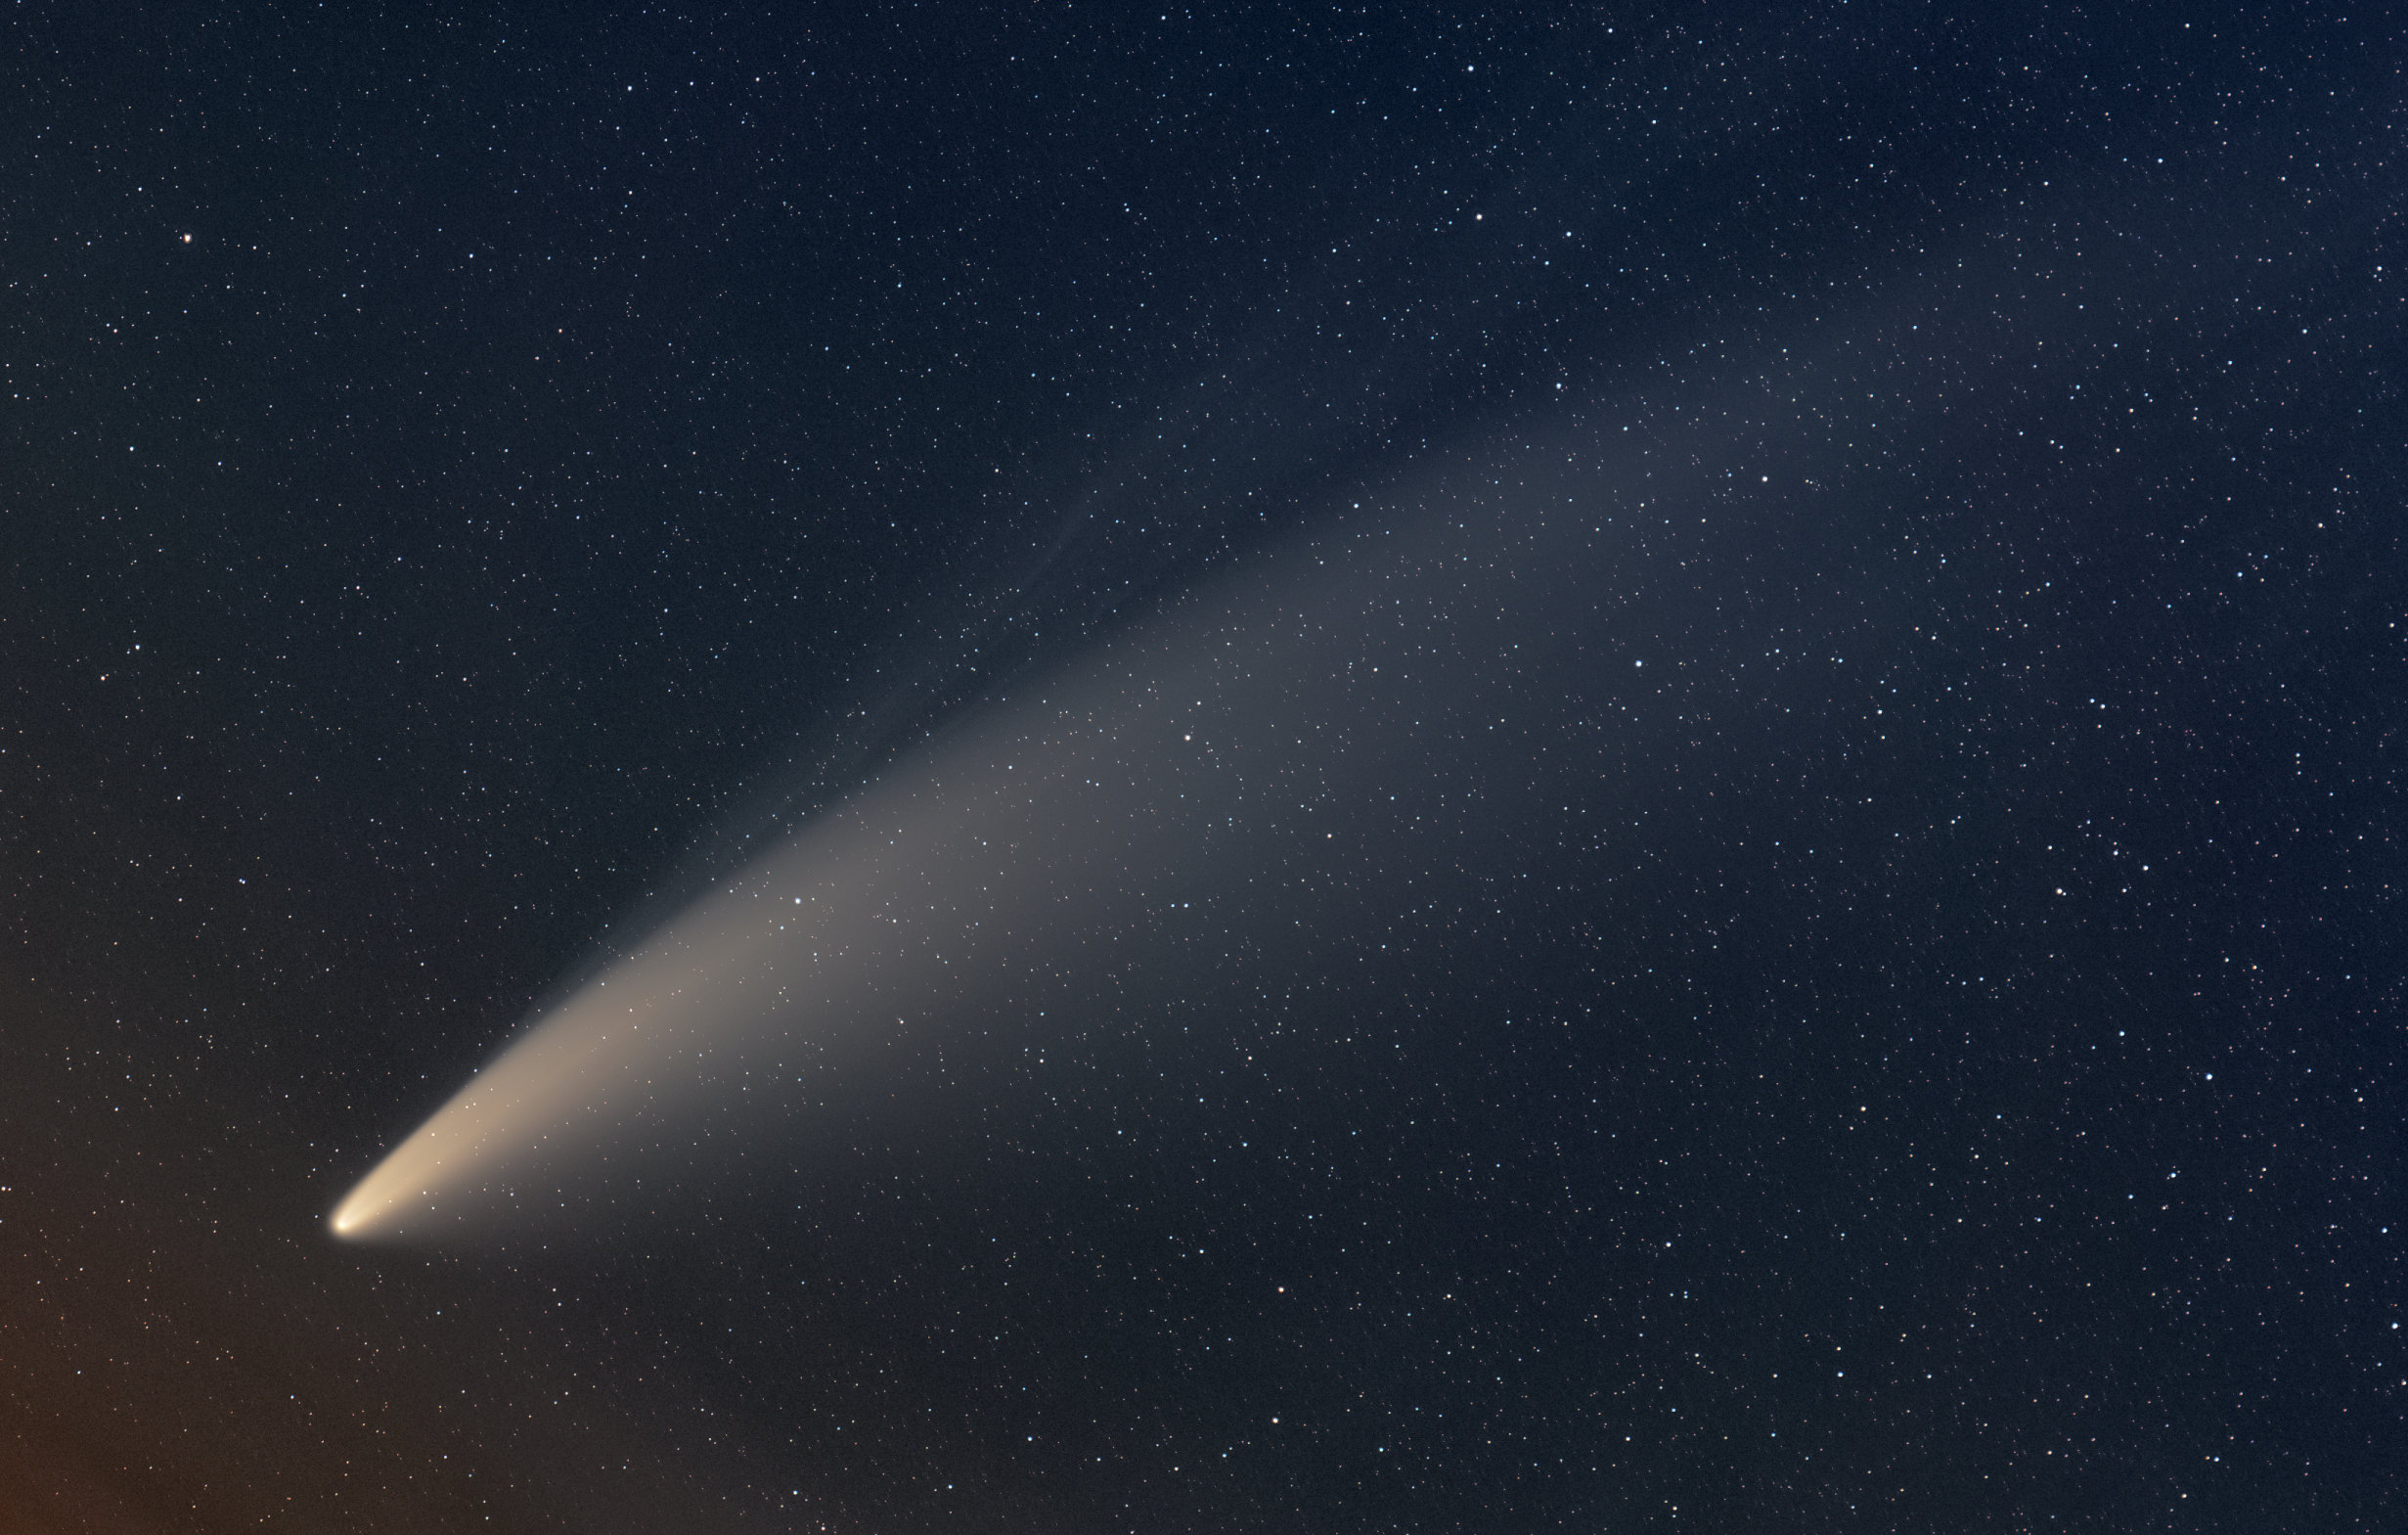 APOD image of Comet NEOWISE and how to see the comet live and in color, page 1